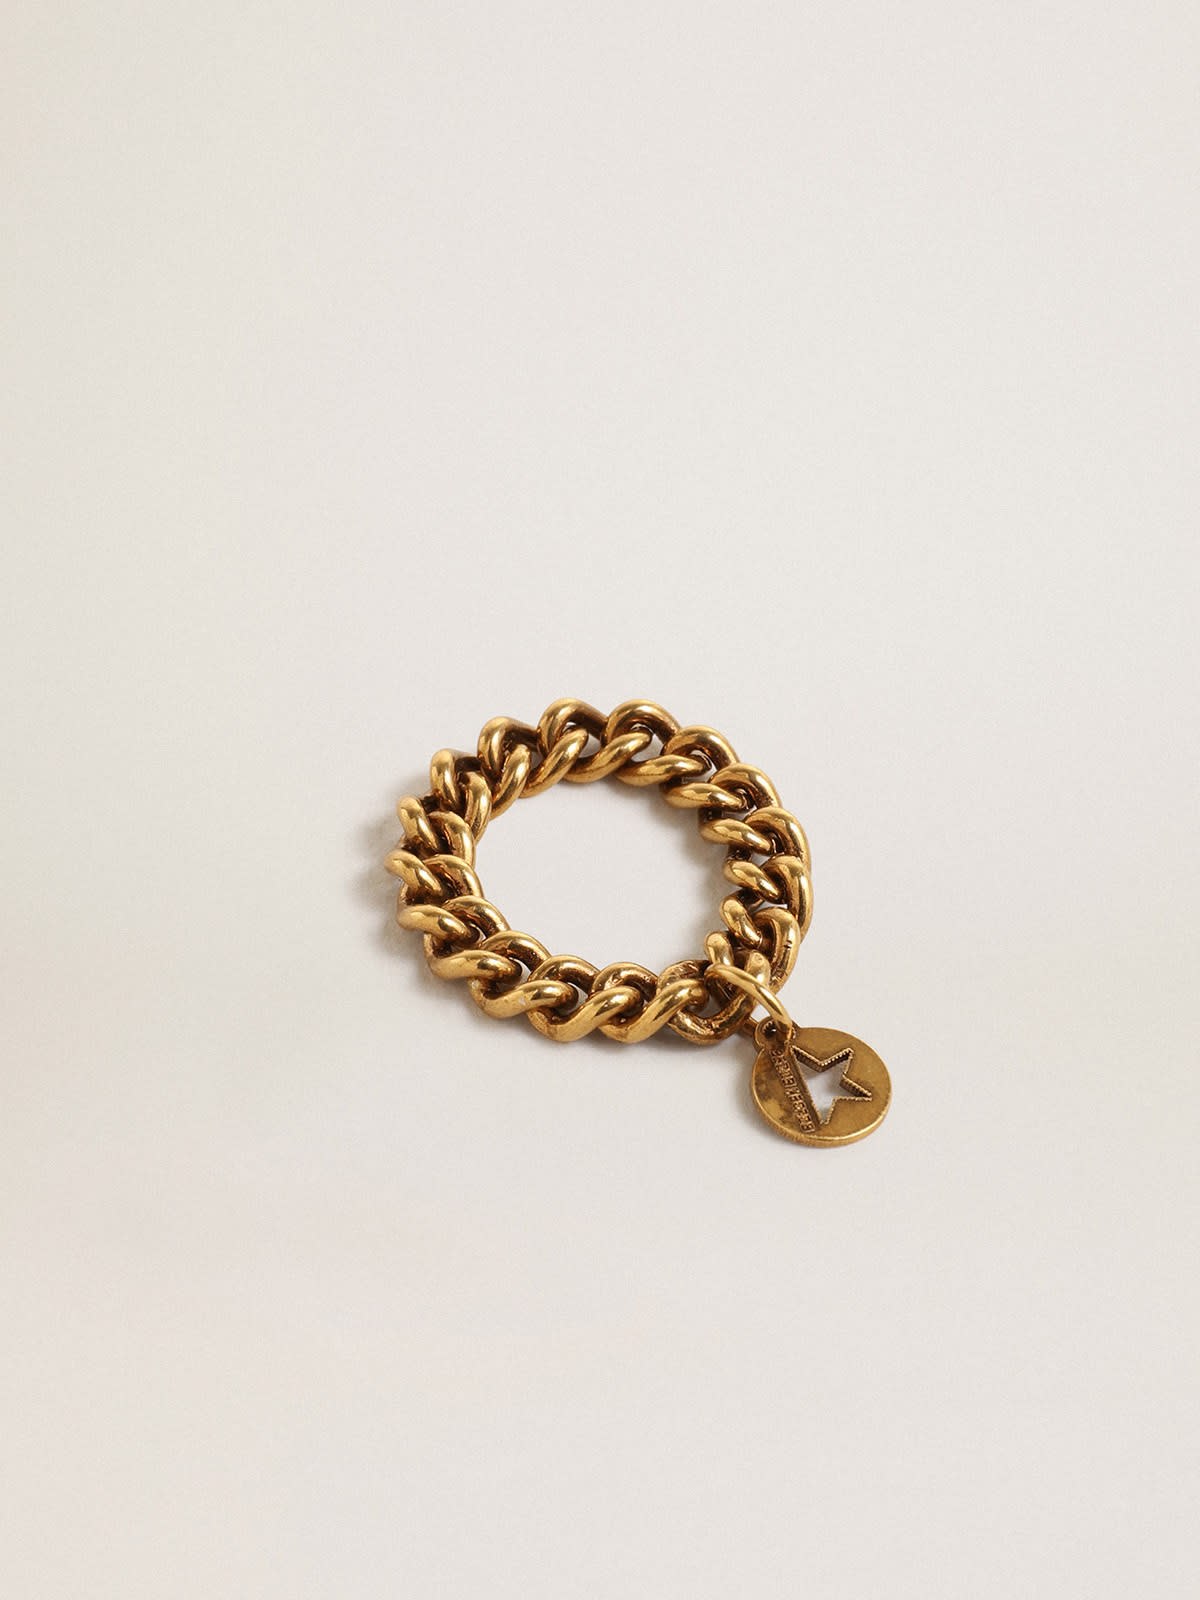 Golden Goose - Ring in antique gold color with flexible links in 